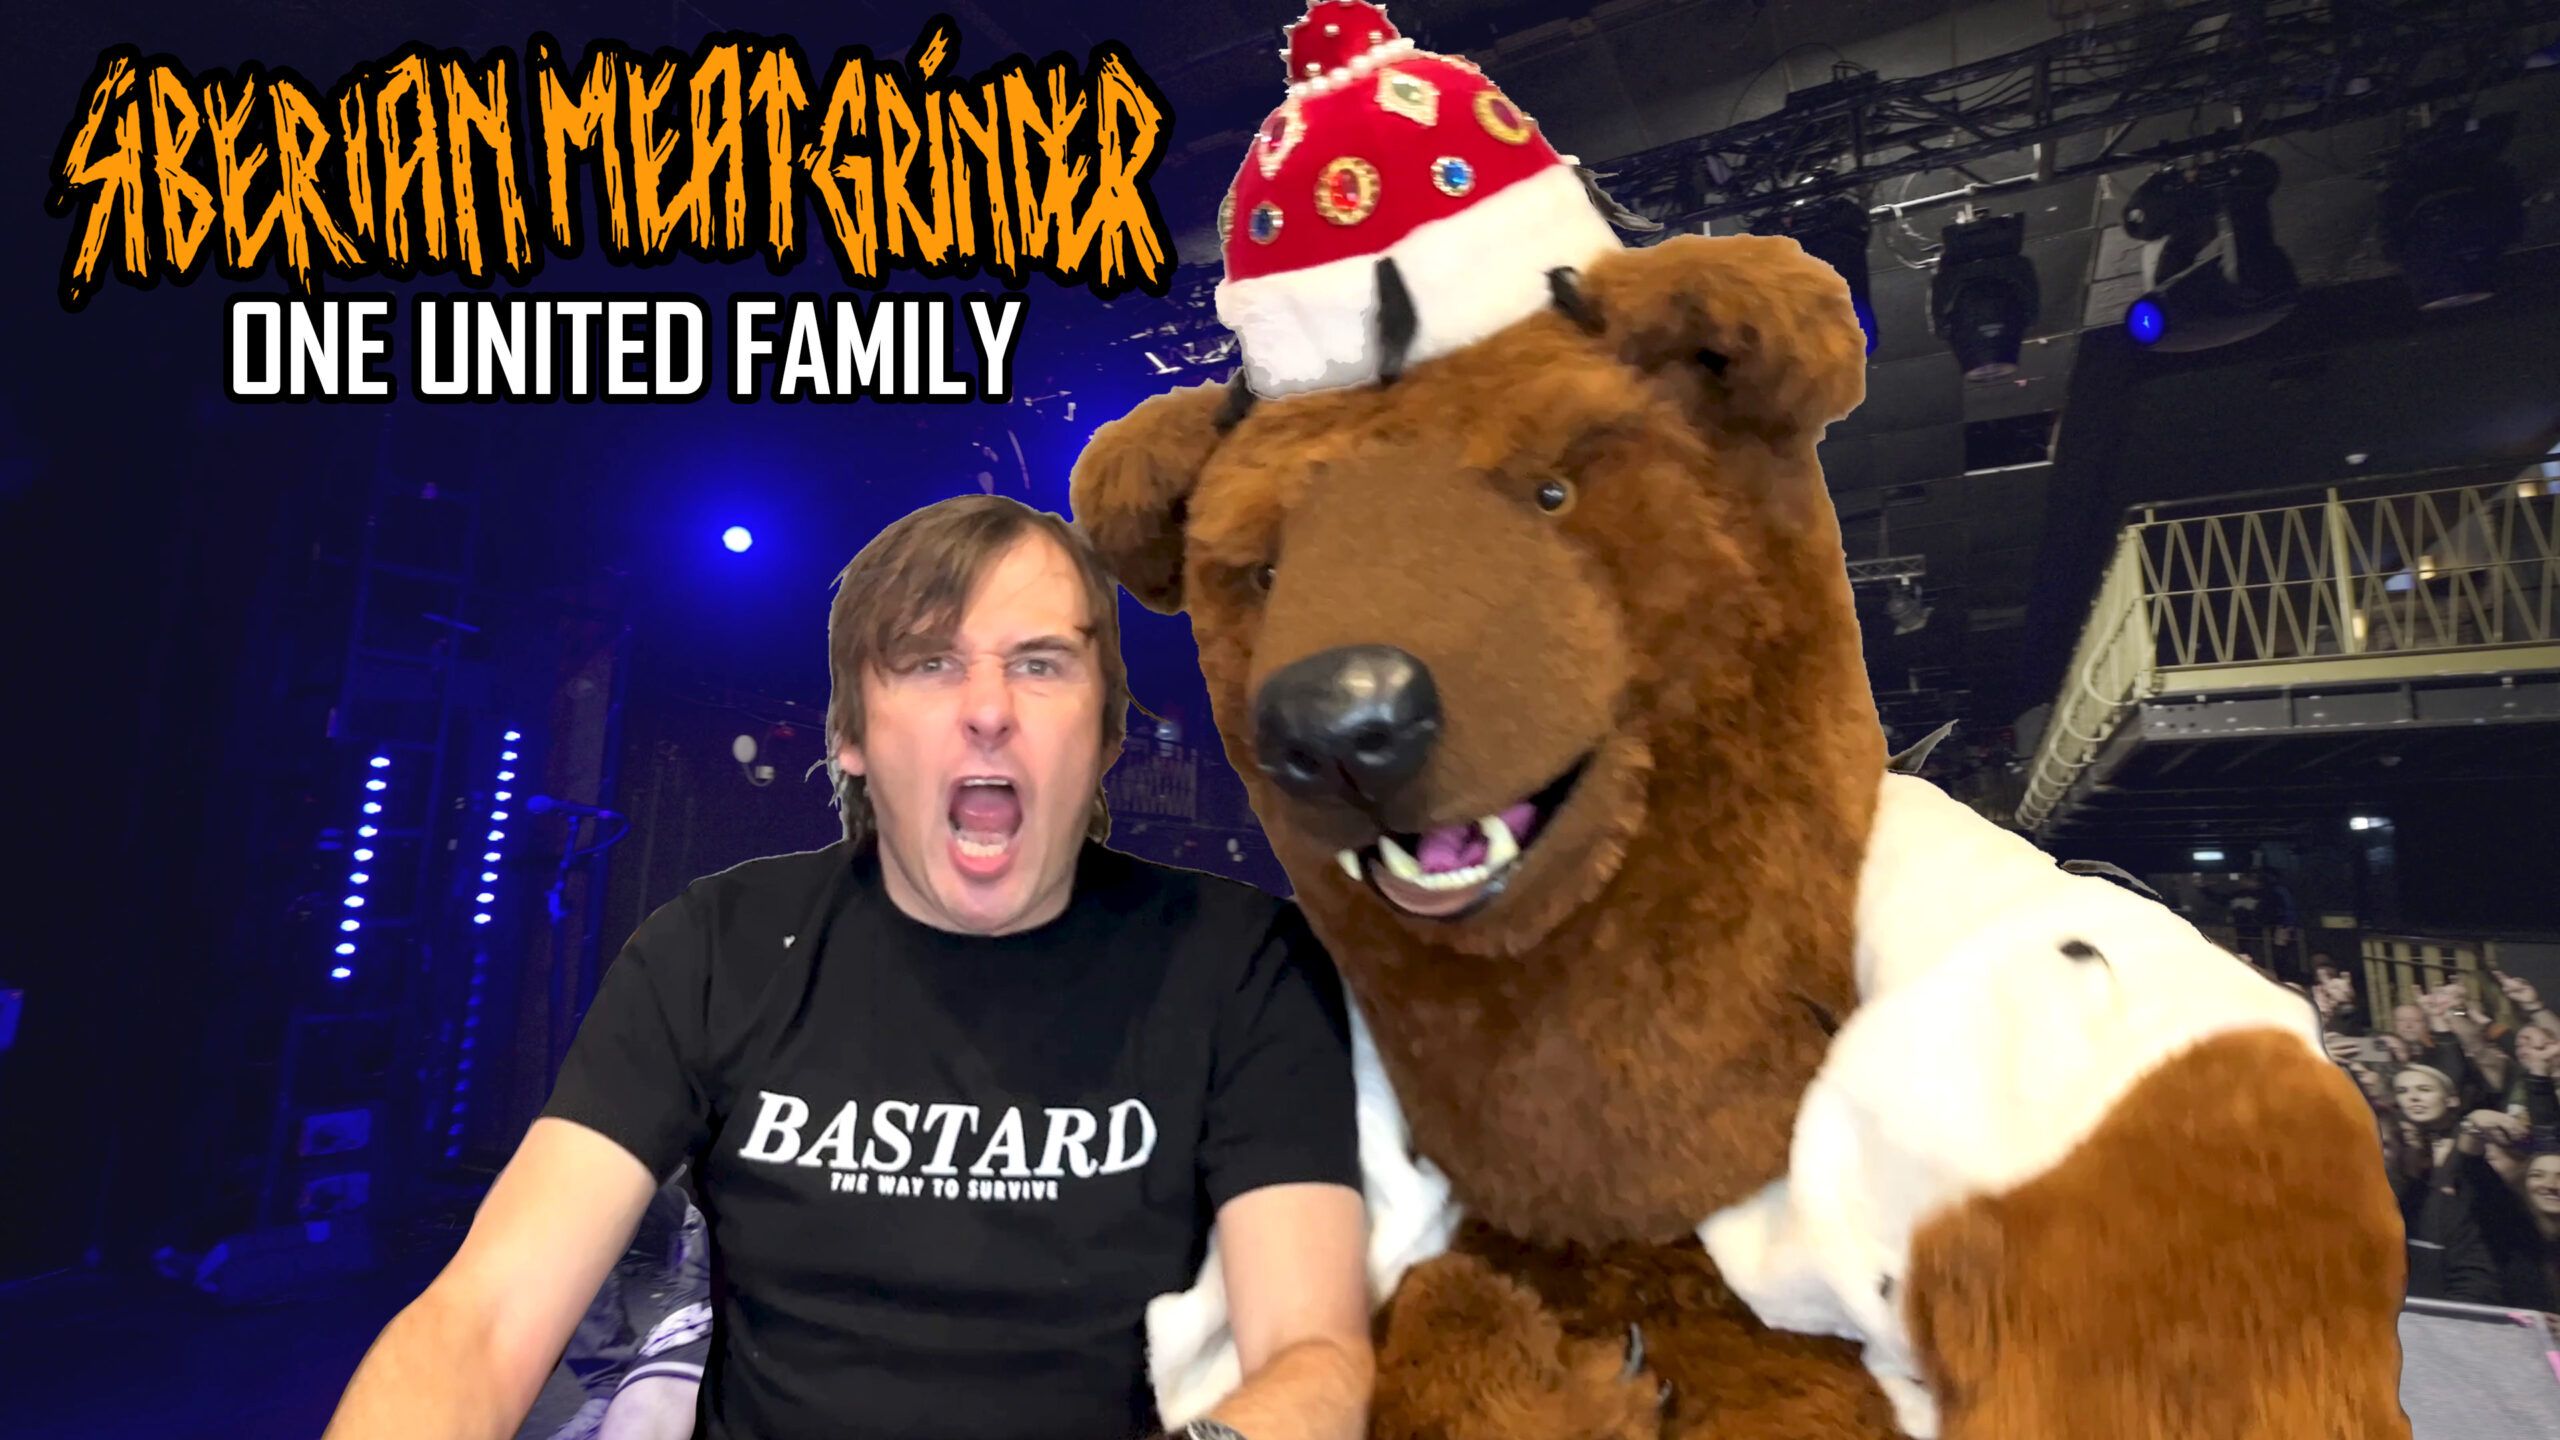 Siberian Meat Grinder - 'One United Family'